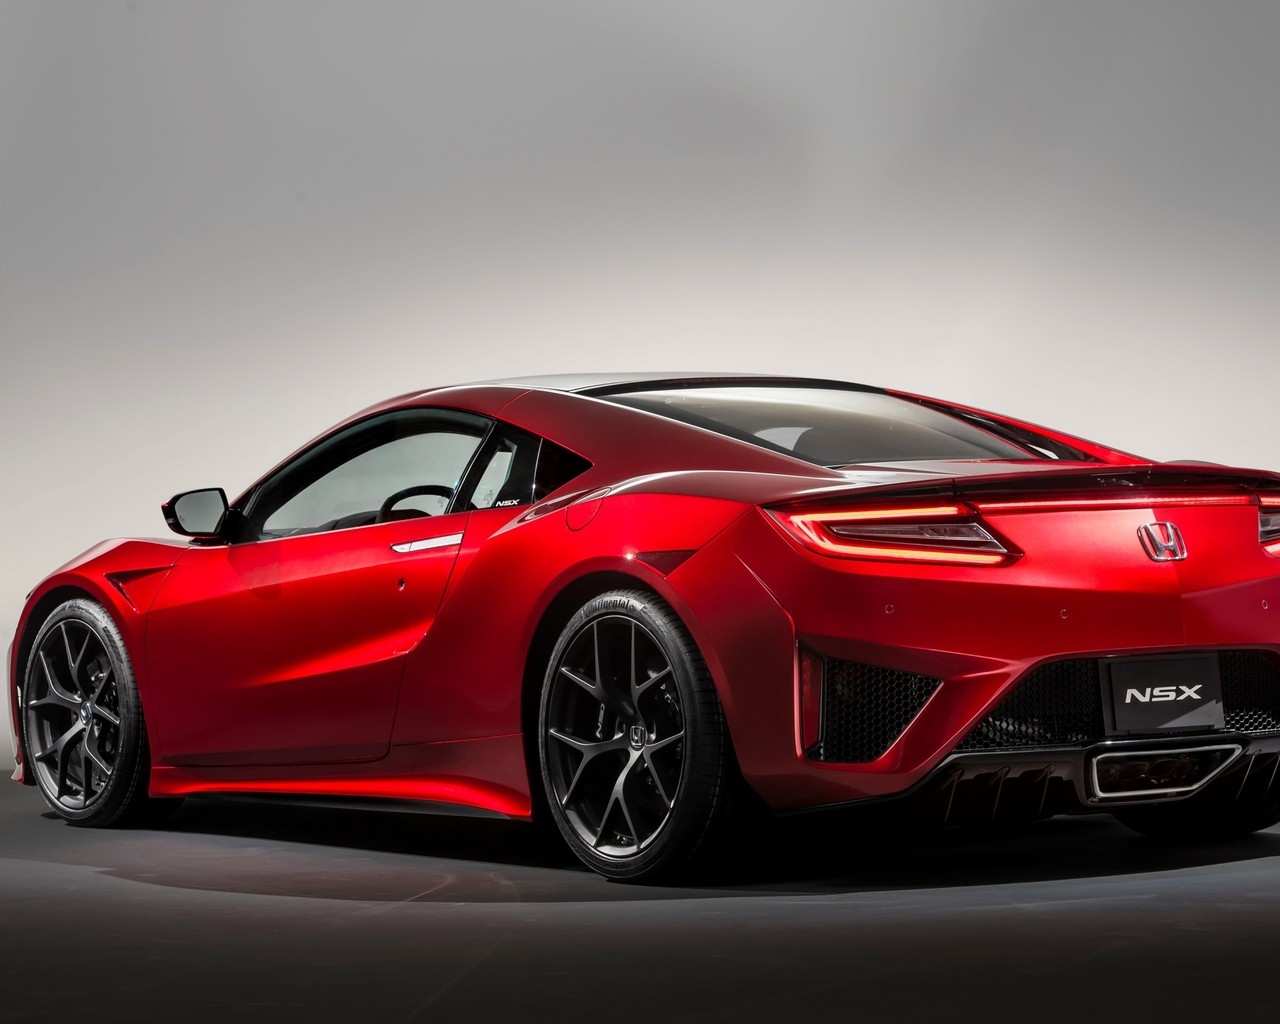 Honda NSX 2015 Back View for 1280 x 1024 resolution